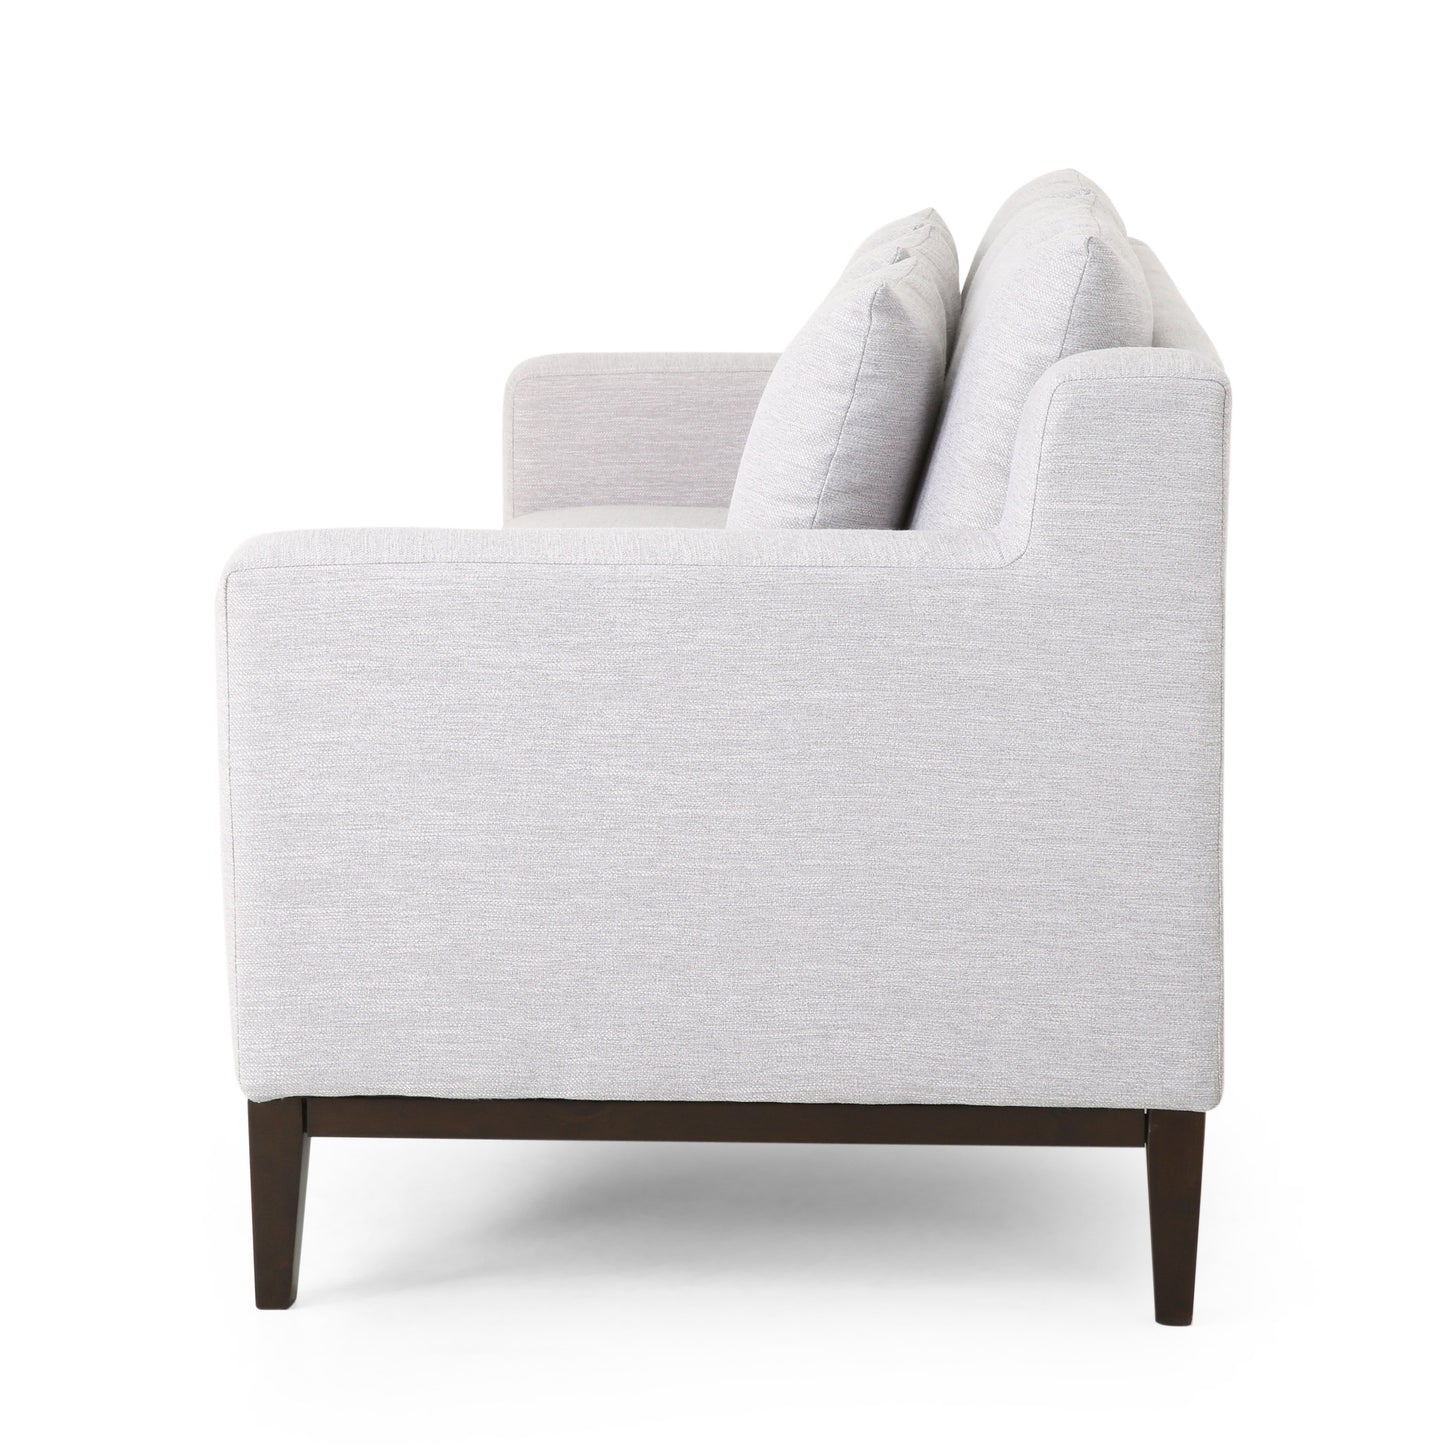 Noxon Contemporary Fabric 3 Seater Sofa with Accent Pillows